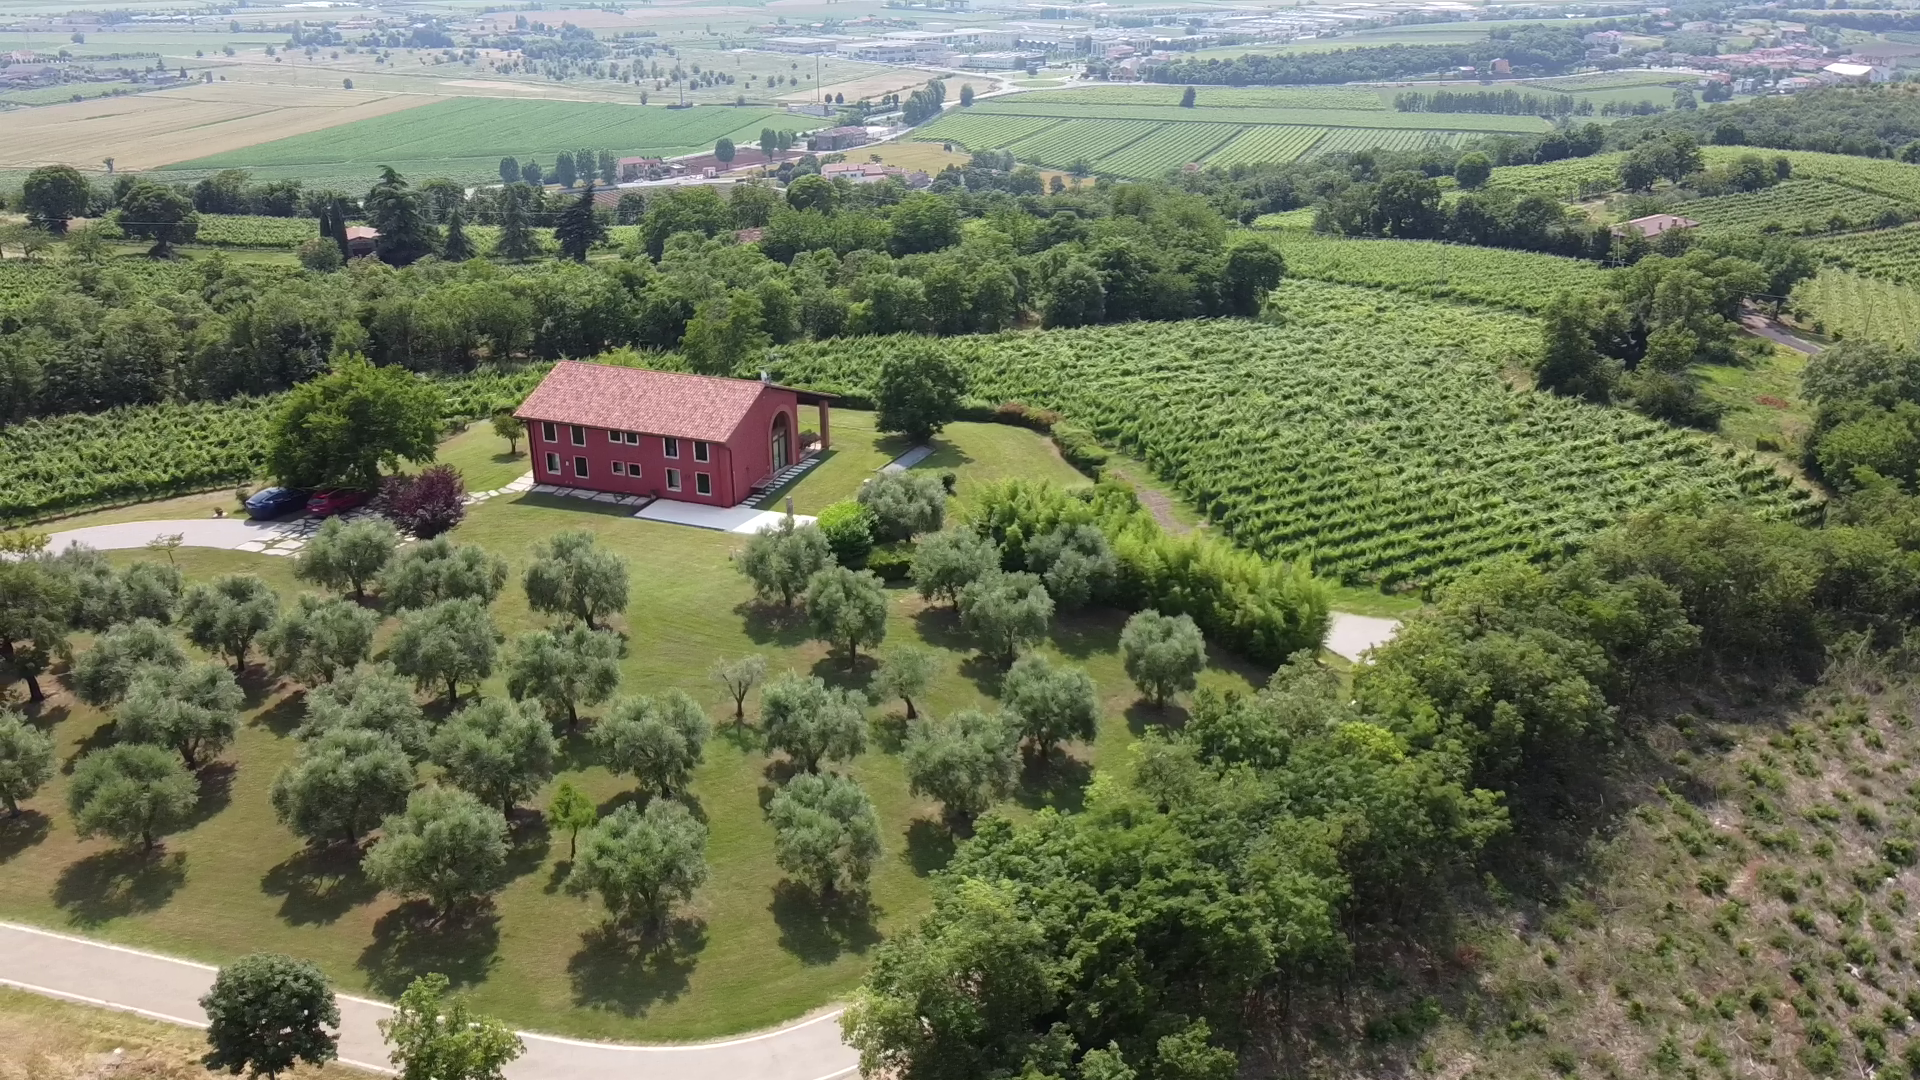 The winery seen from above with its vineyards